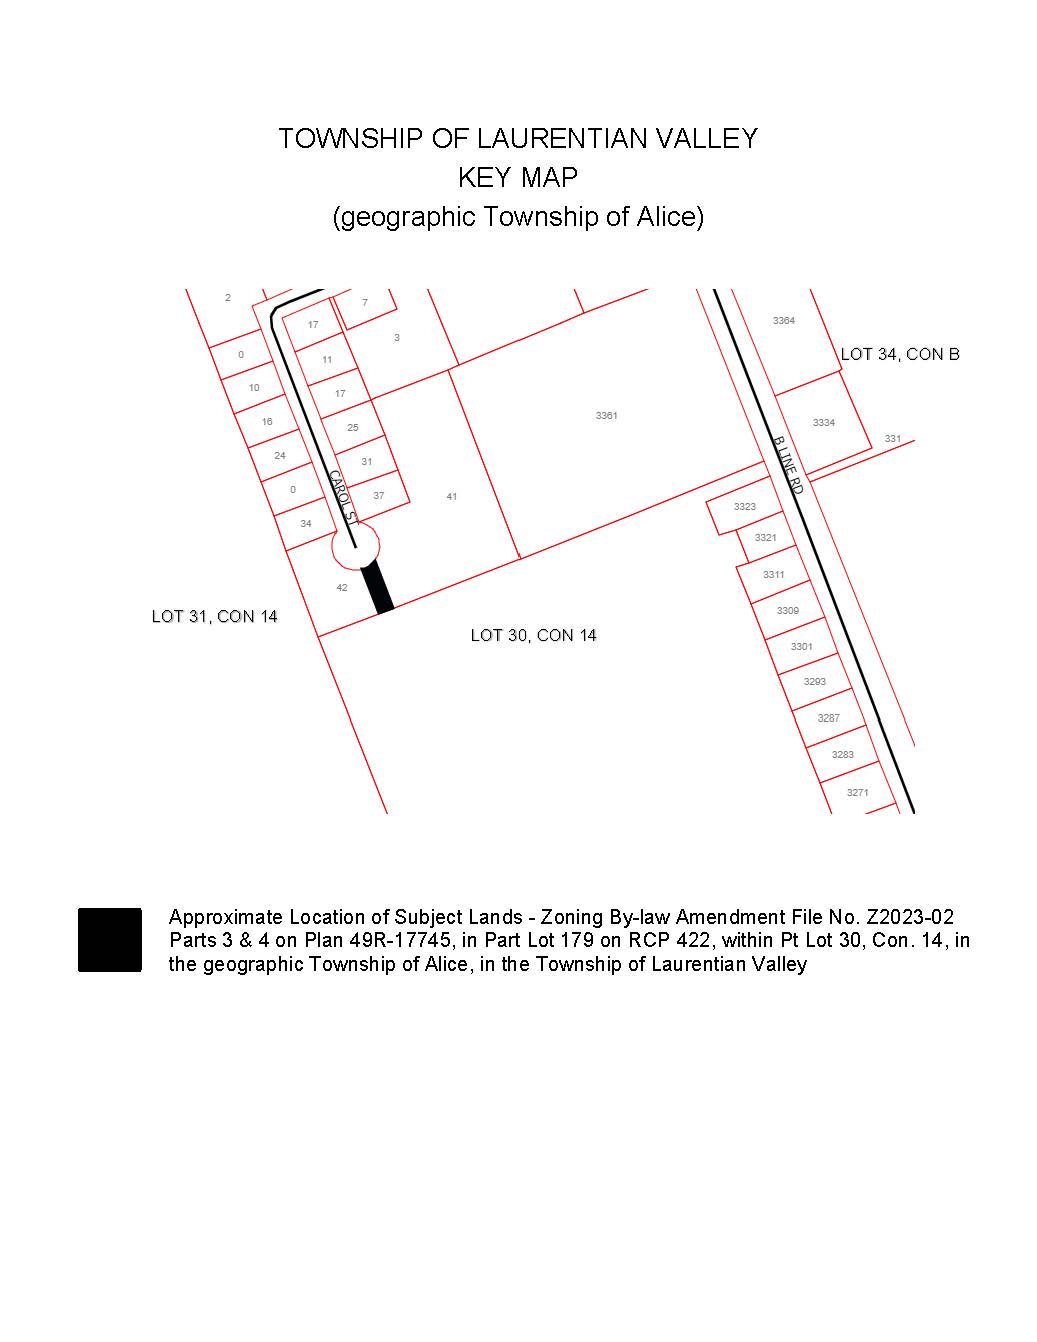 Image of key map showing subject property for file Z2023 02.